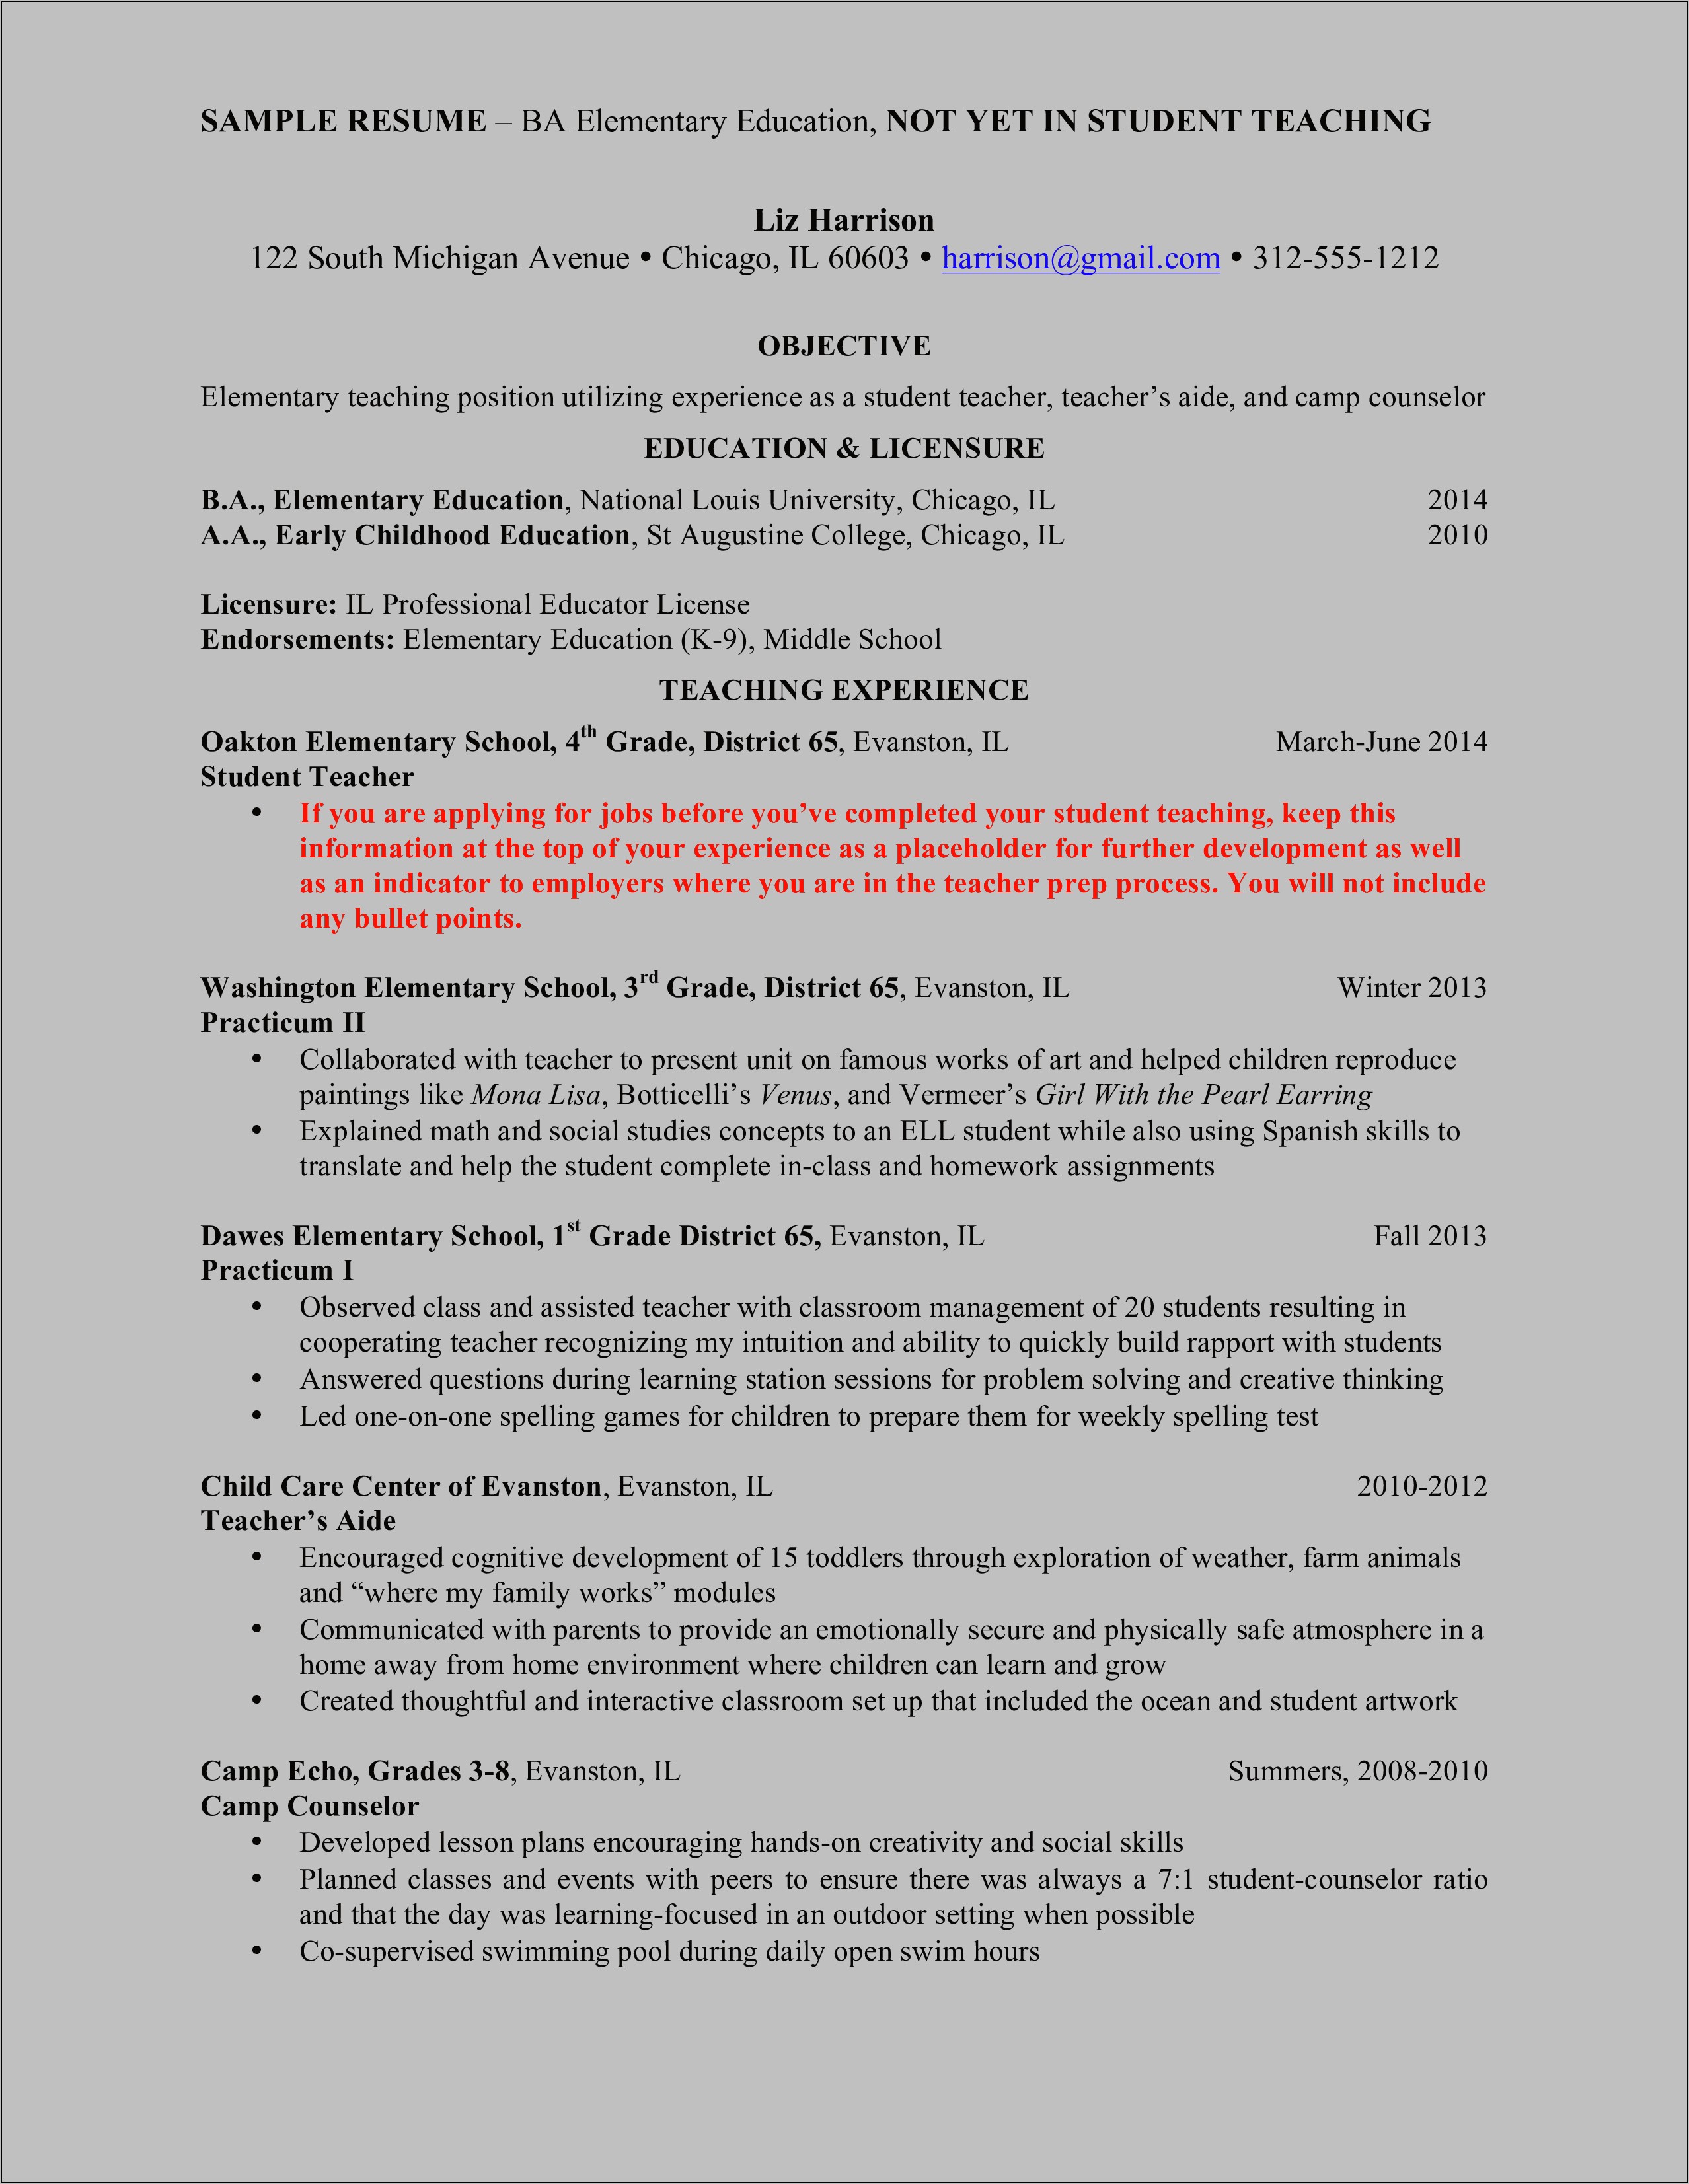 Sample Resume With Practicum Experience